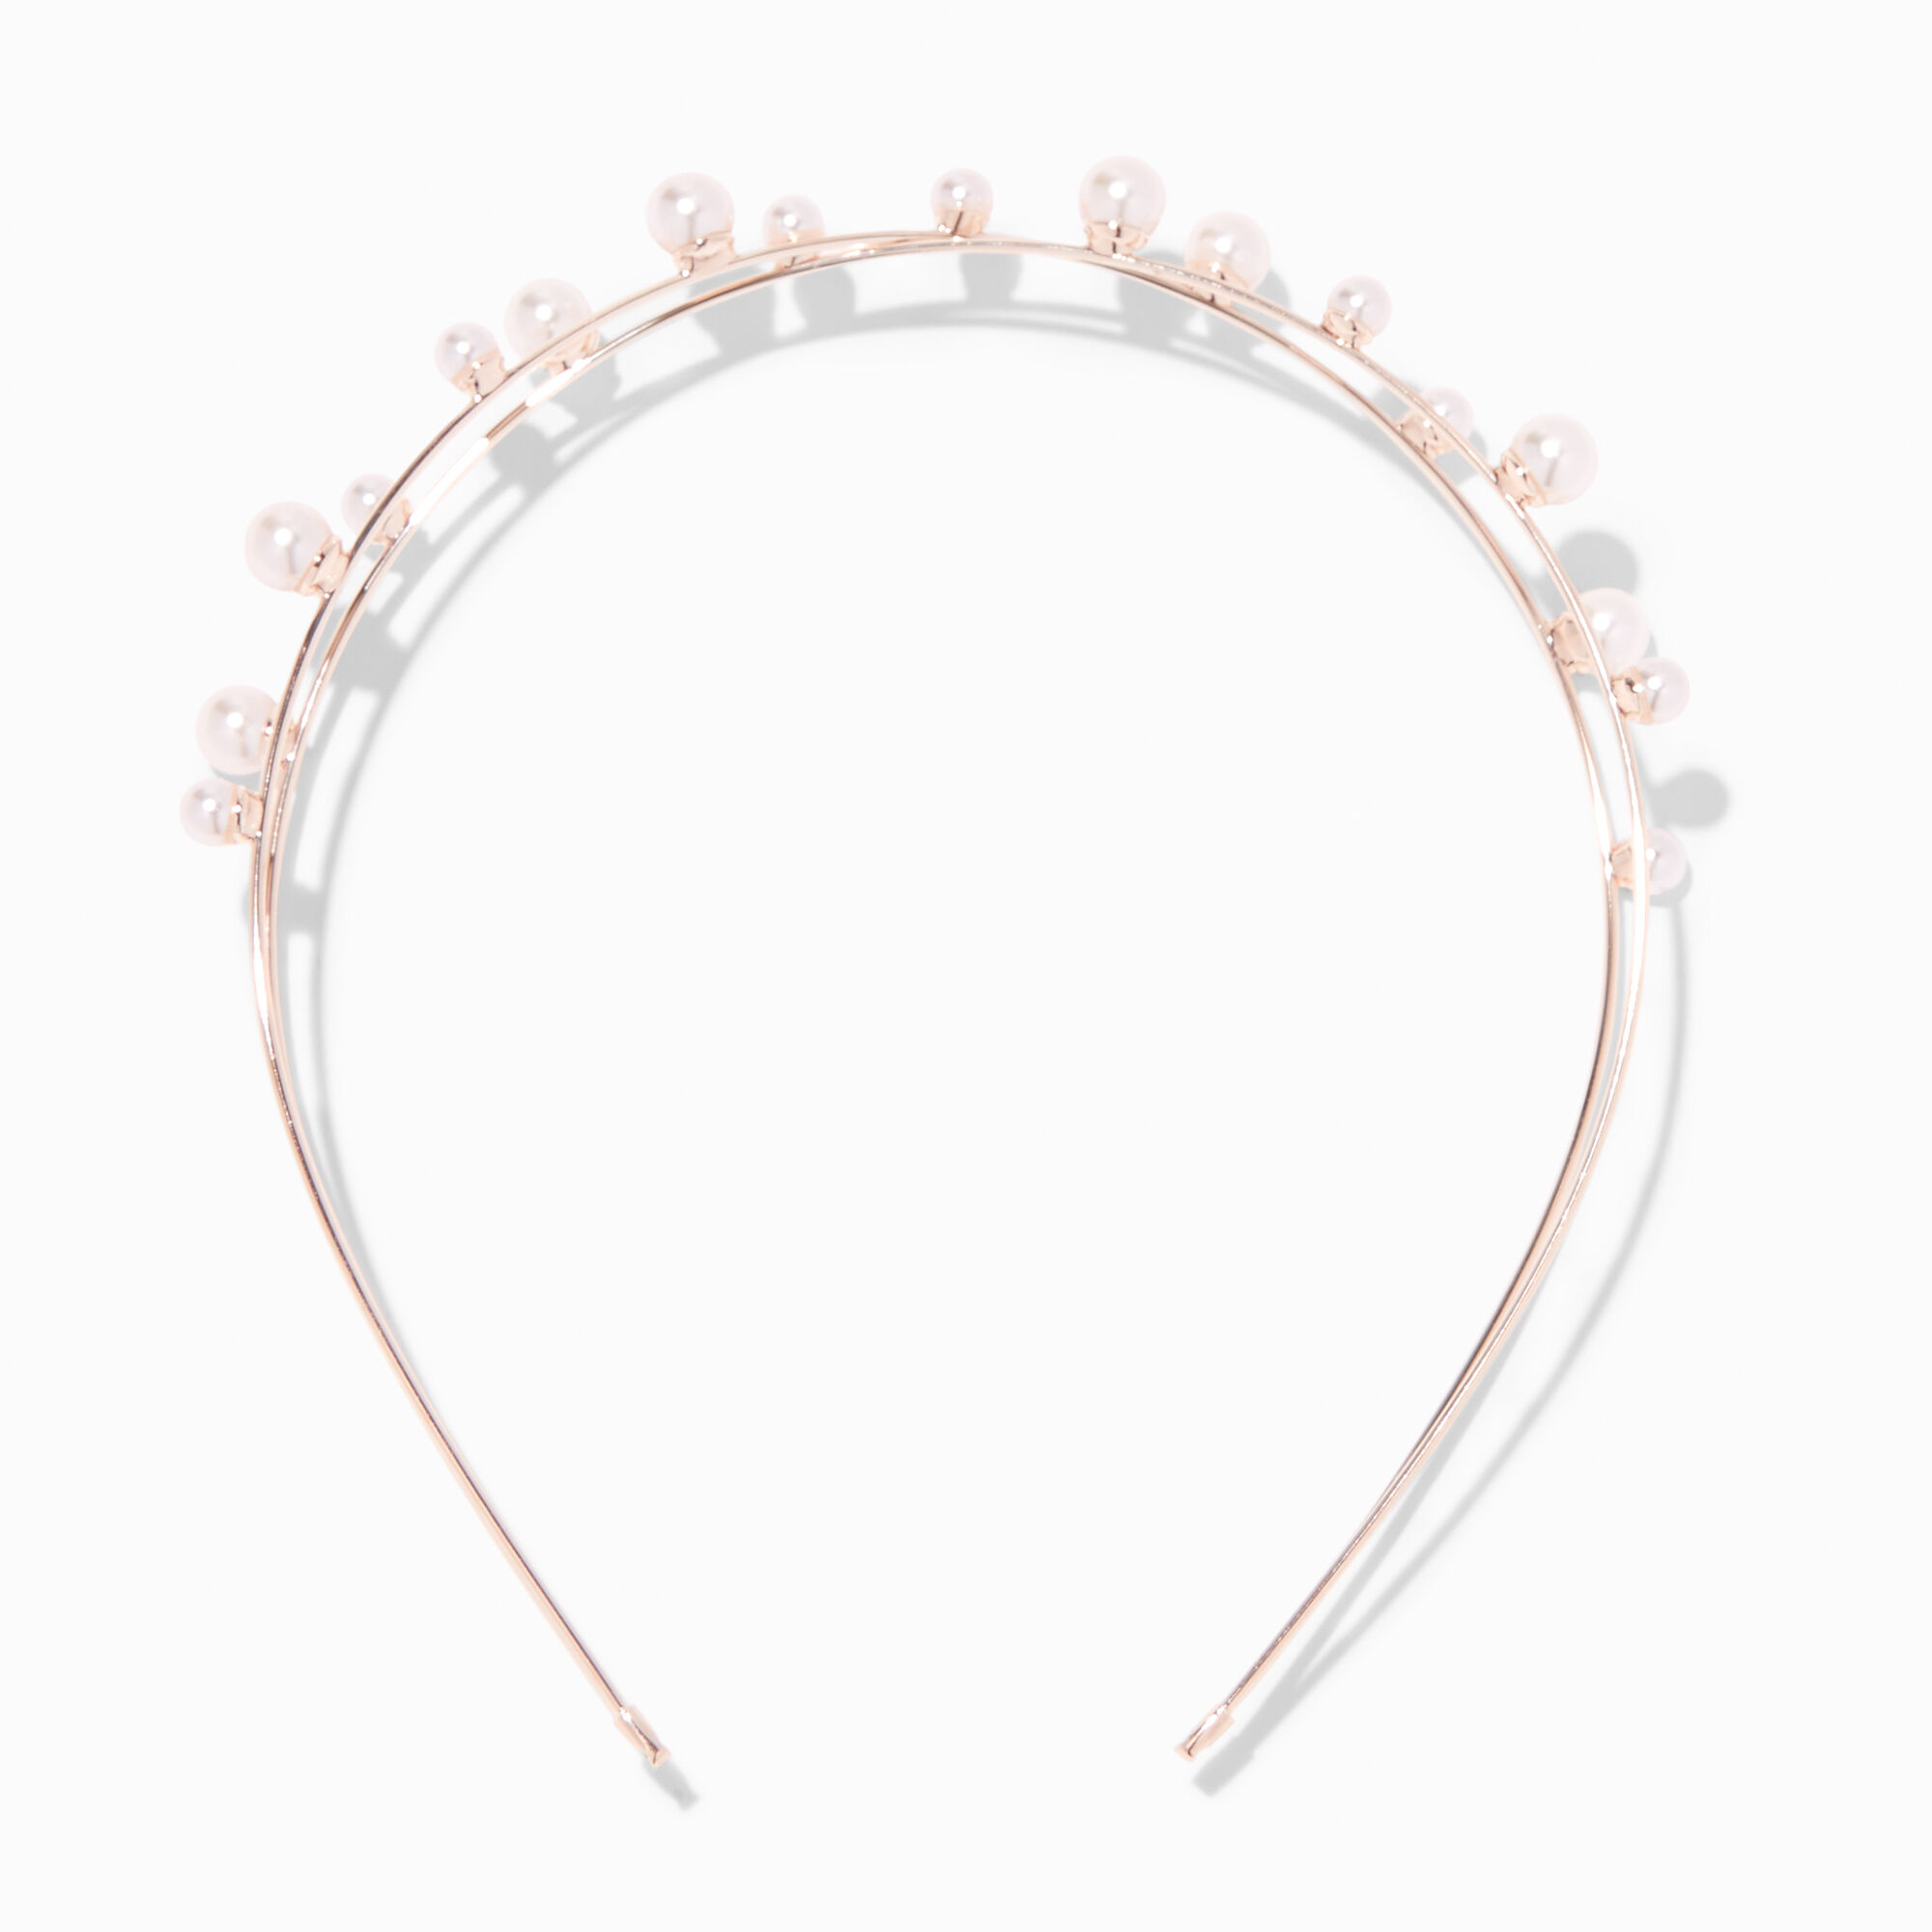 View Claires Tone Pearl CrissCross Headband Rose Gold information